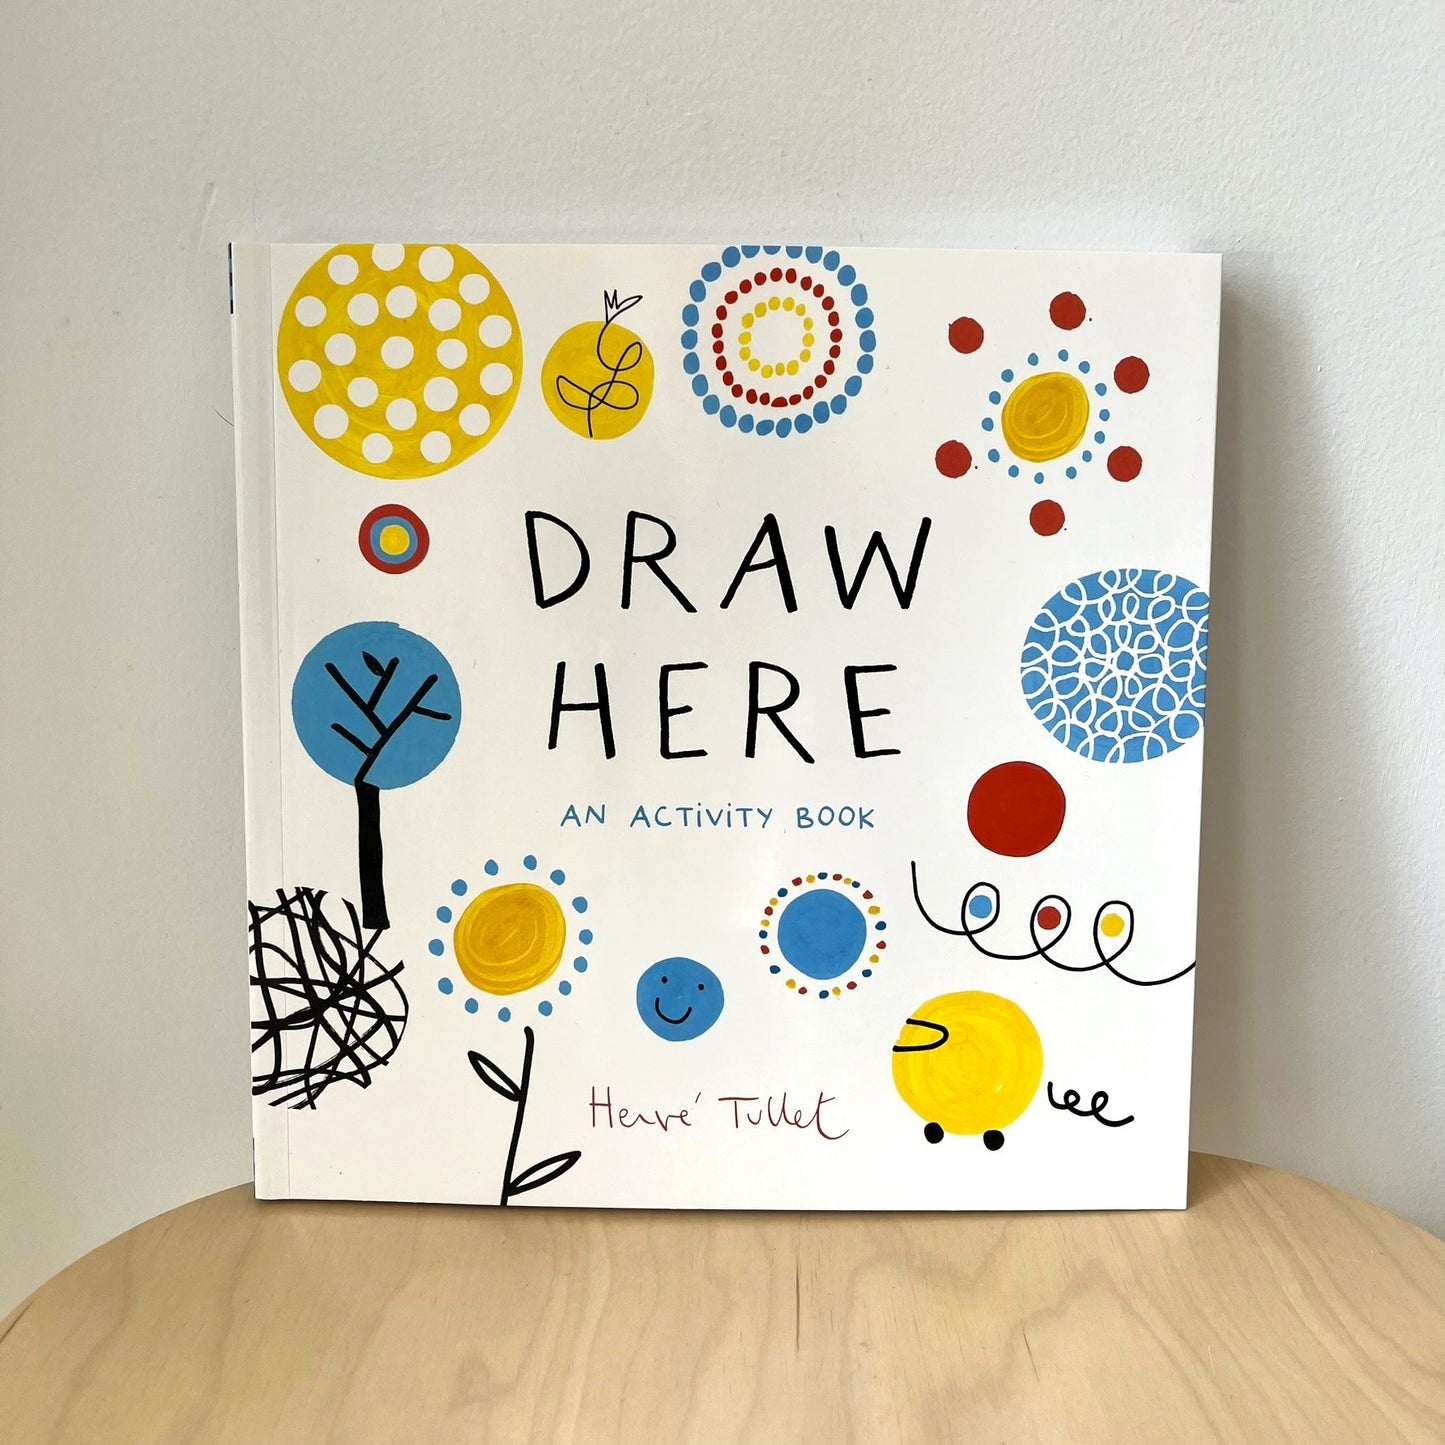 Draw Here book